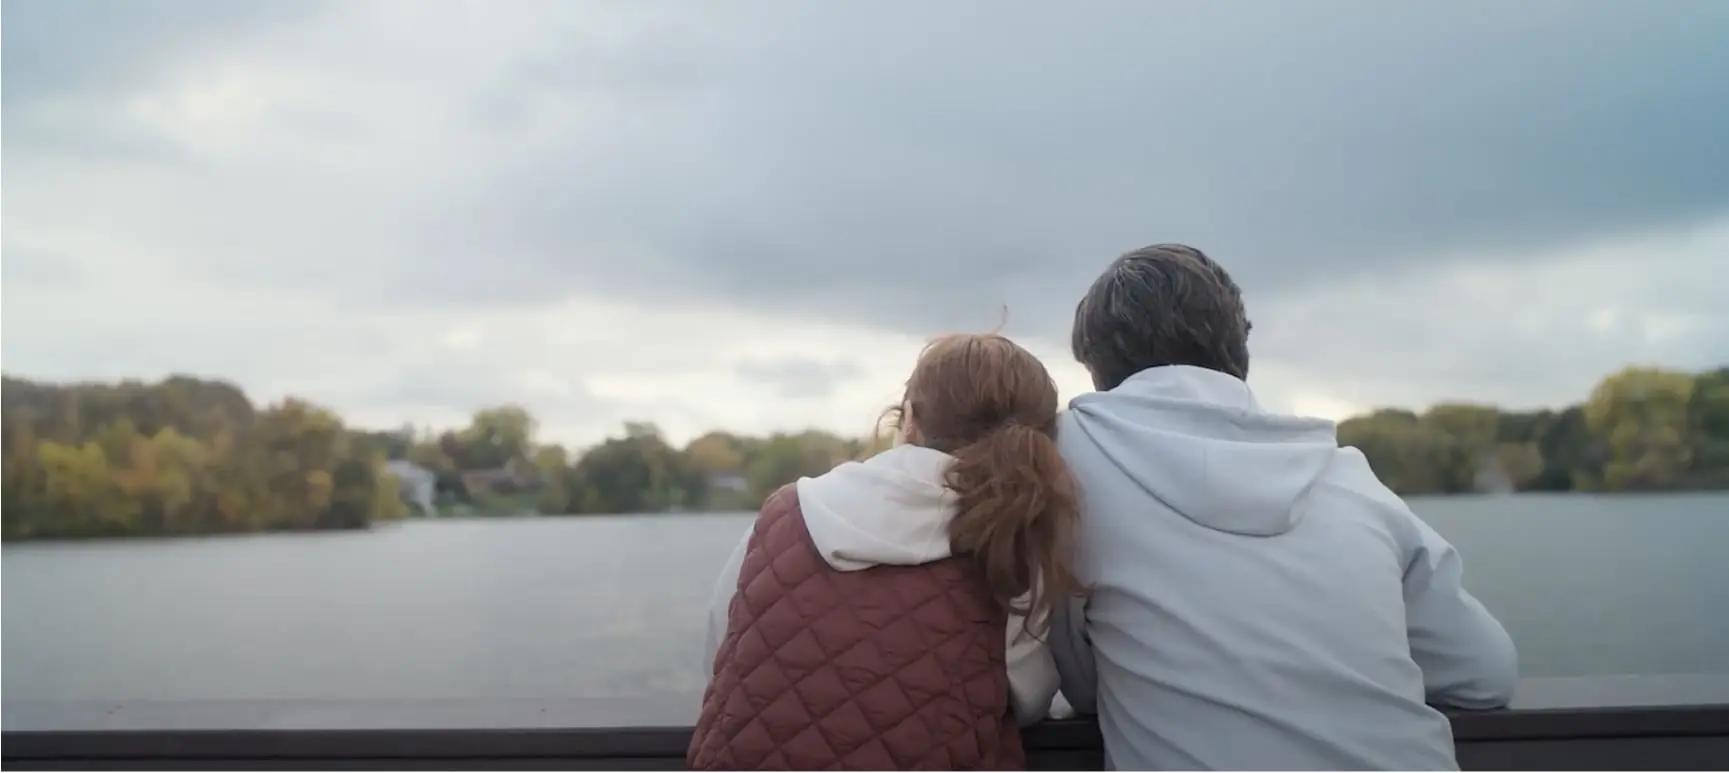 The image shows two individuals sitting closely together, looking out over a body of water.